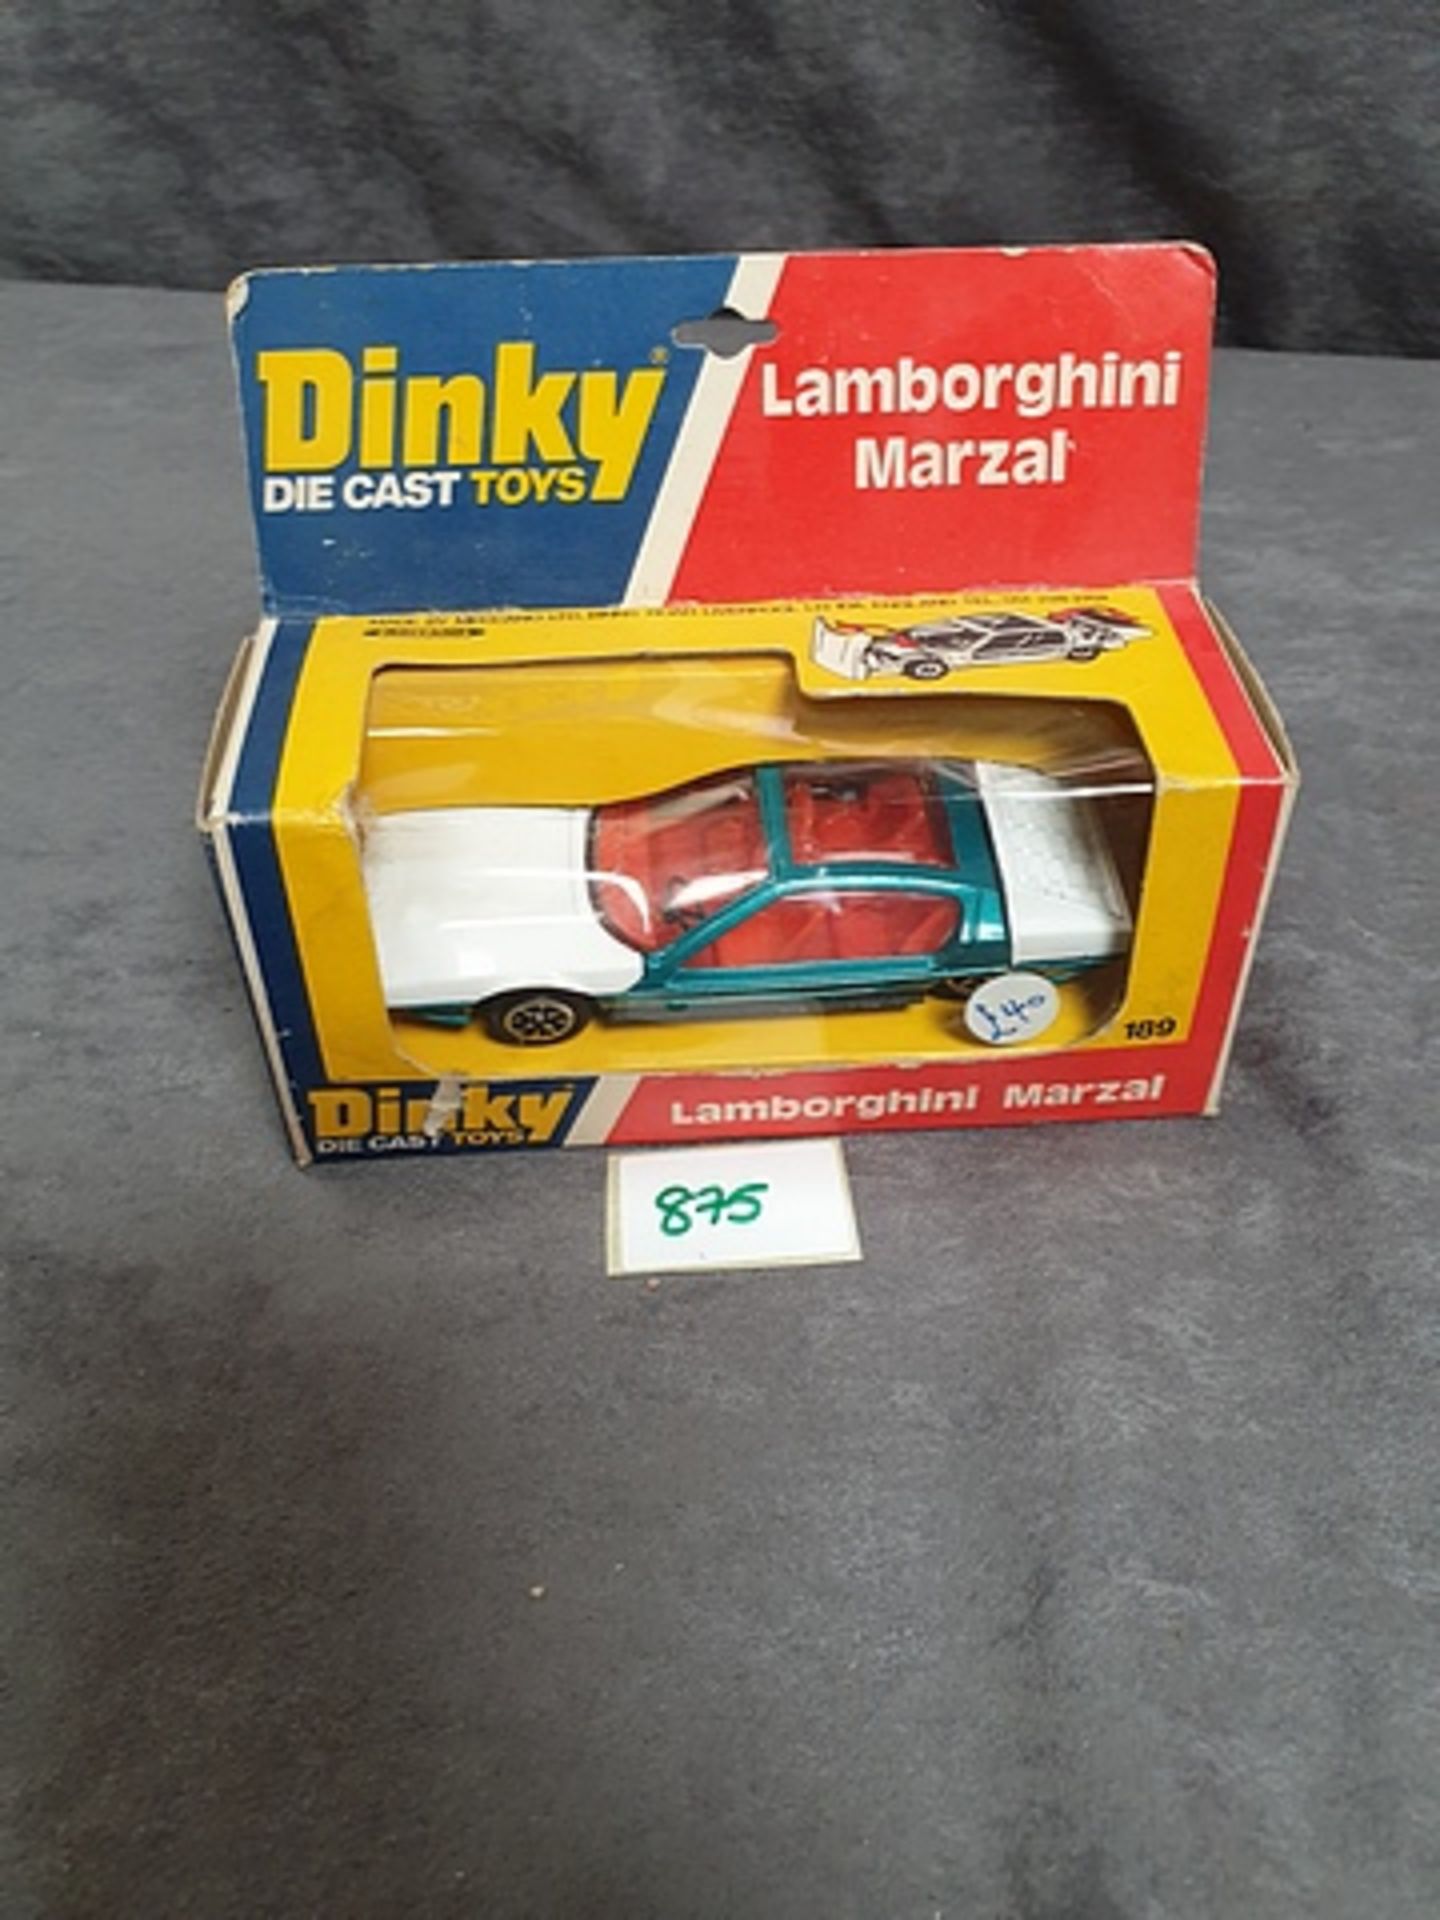 Dinky Diecast Toys #189 Lamborghini Marzal Complete In Box - Image 2 of 2